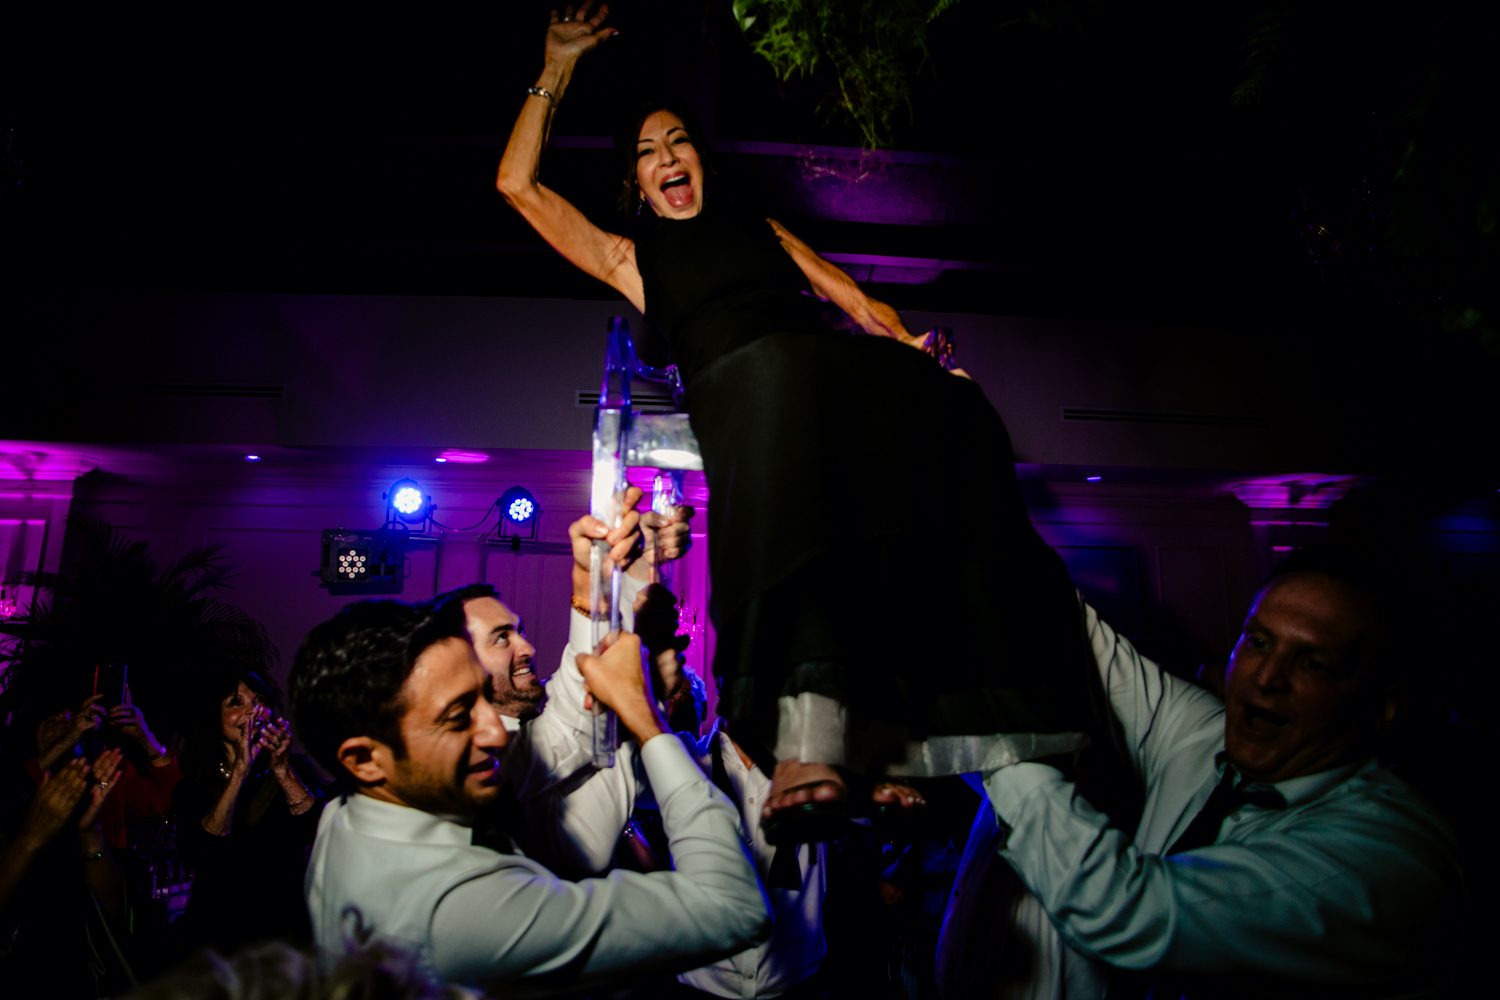 A woman is being carried by a man at a wedding.